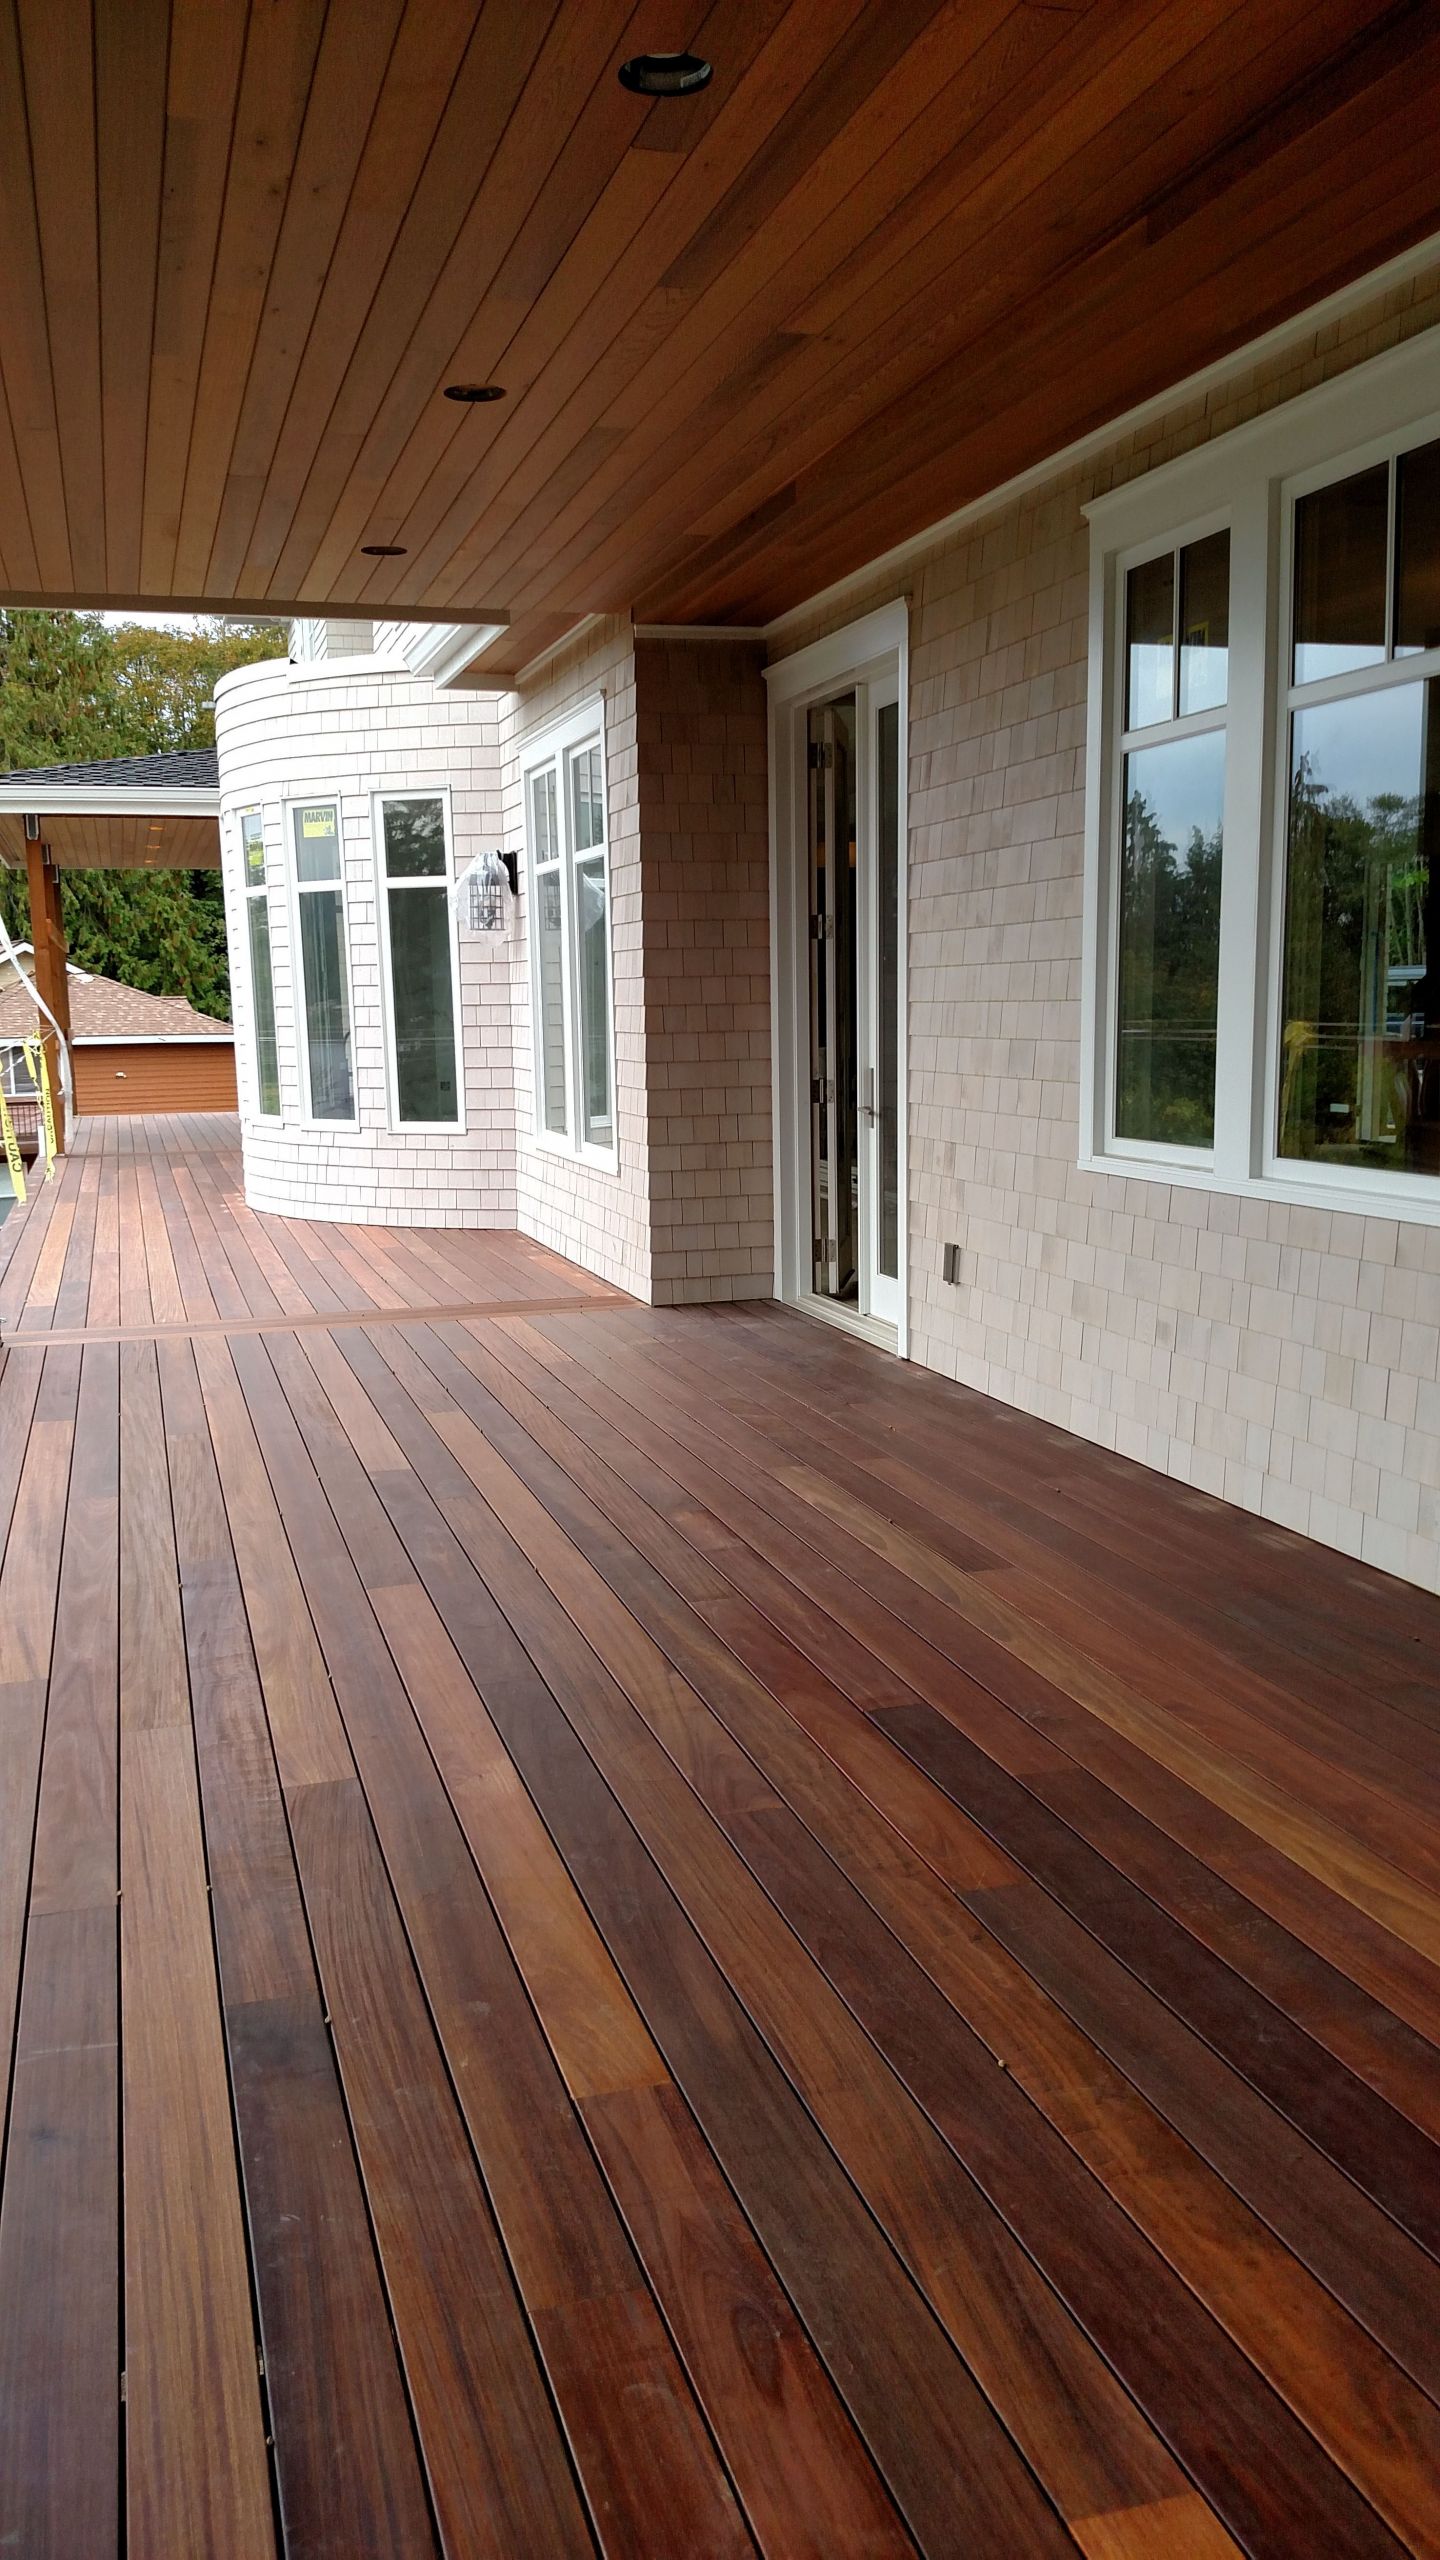 Exterior Deck Paint
 Make your Deck e Anew with Cool Deck Stain Colors